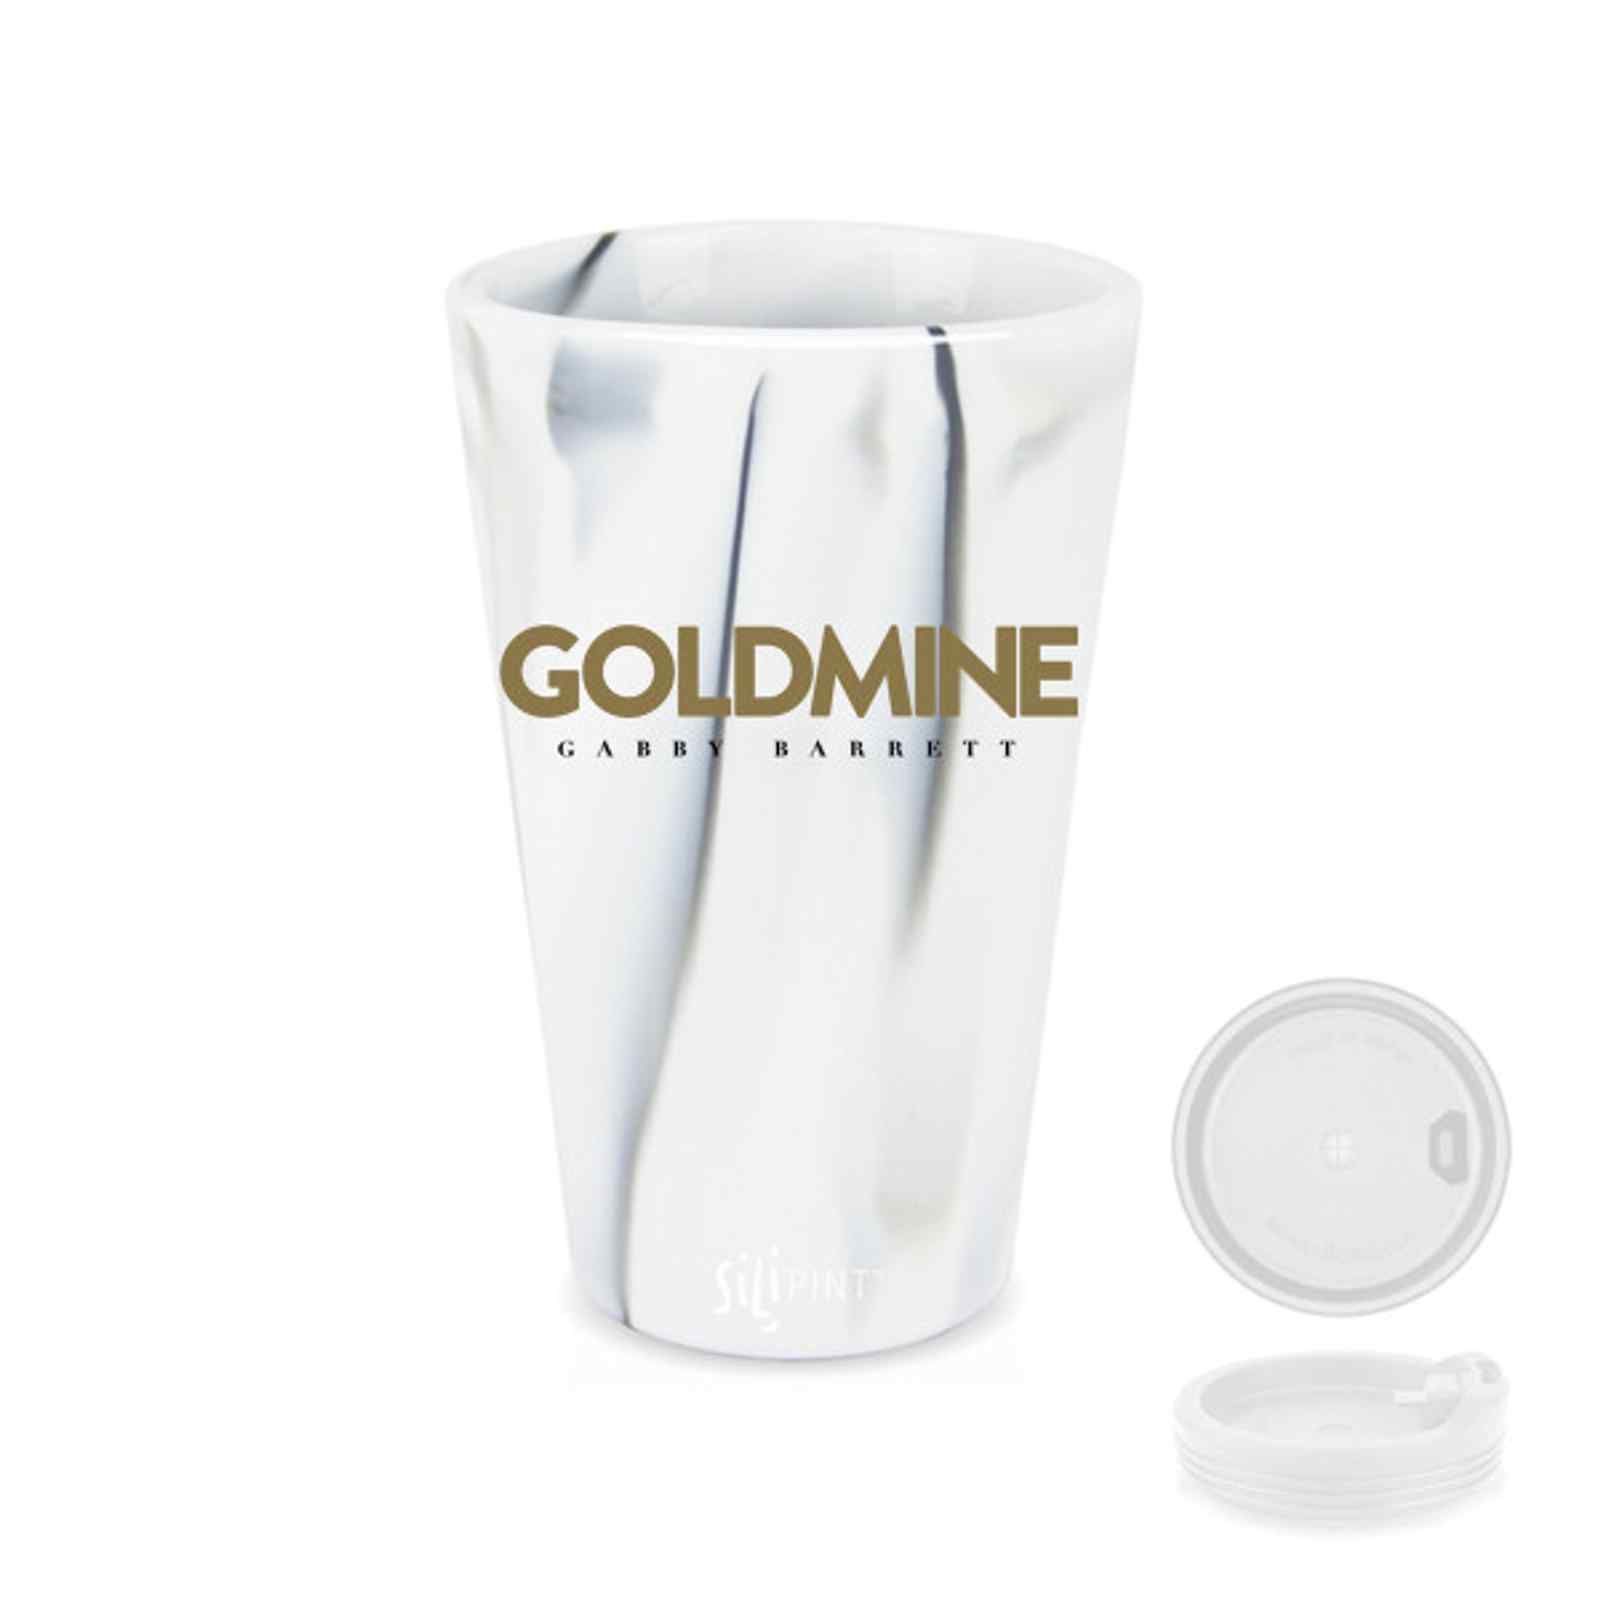 Goldmine Silicone Cup